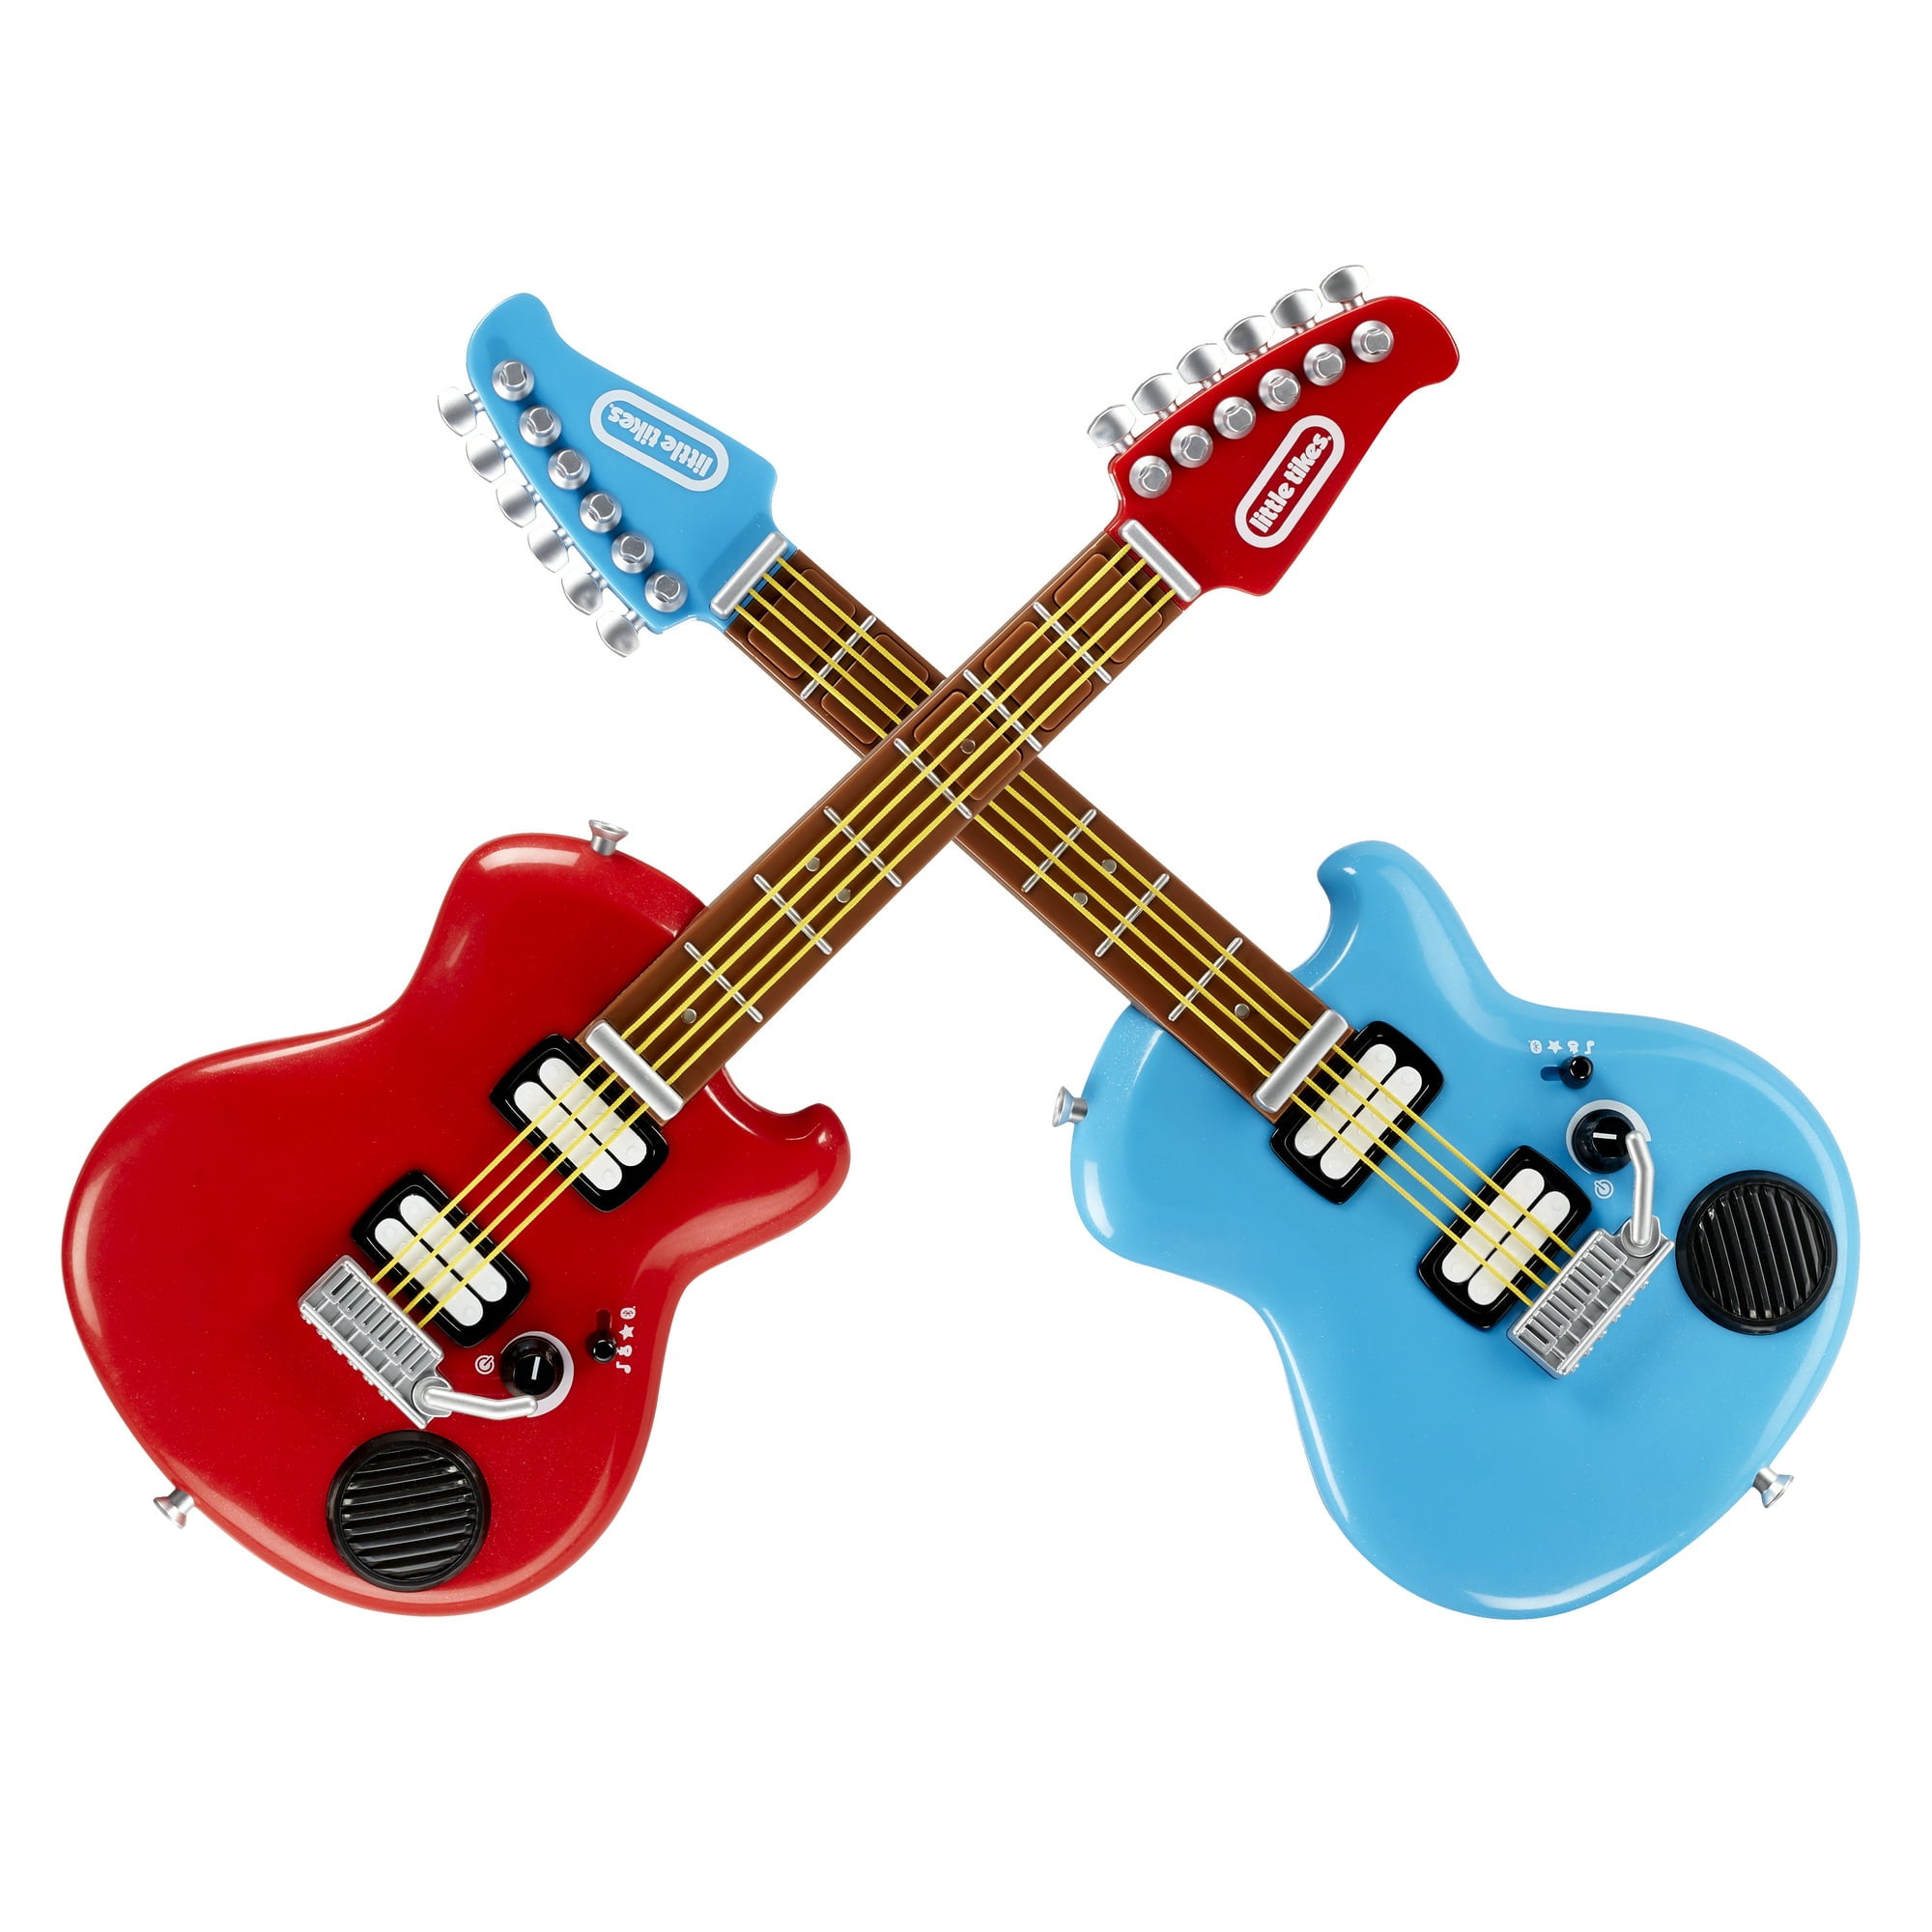 My Real Jam™ Twice the Fun Guitar™, Two Toy Electric Guitars with Cases and Straps, 4 Play Modes, and Bluetooth® Connectivity - For Kids Ages 3+